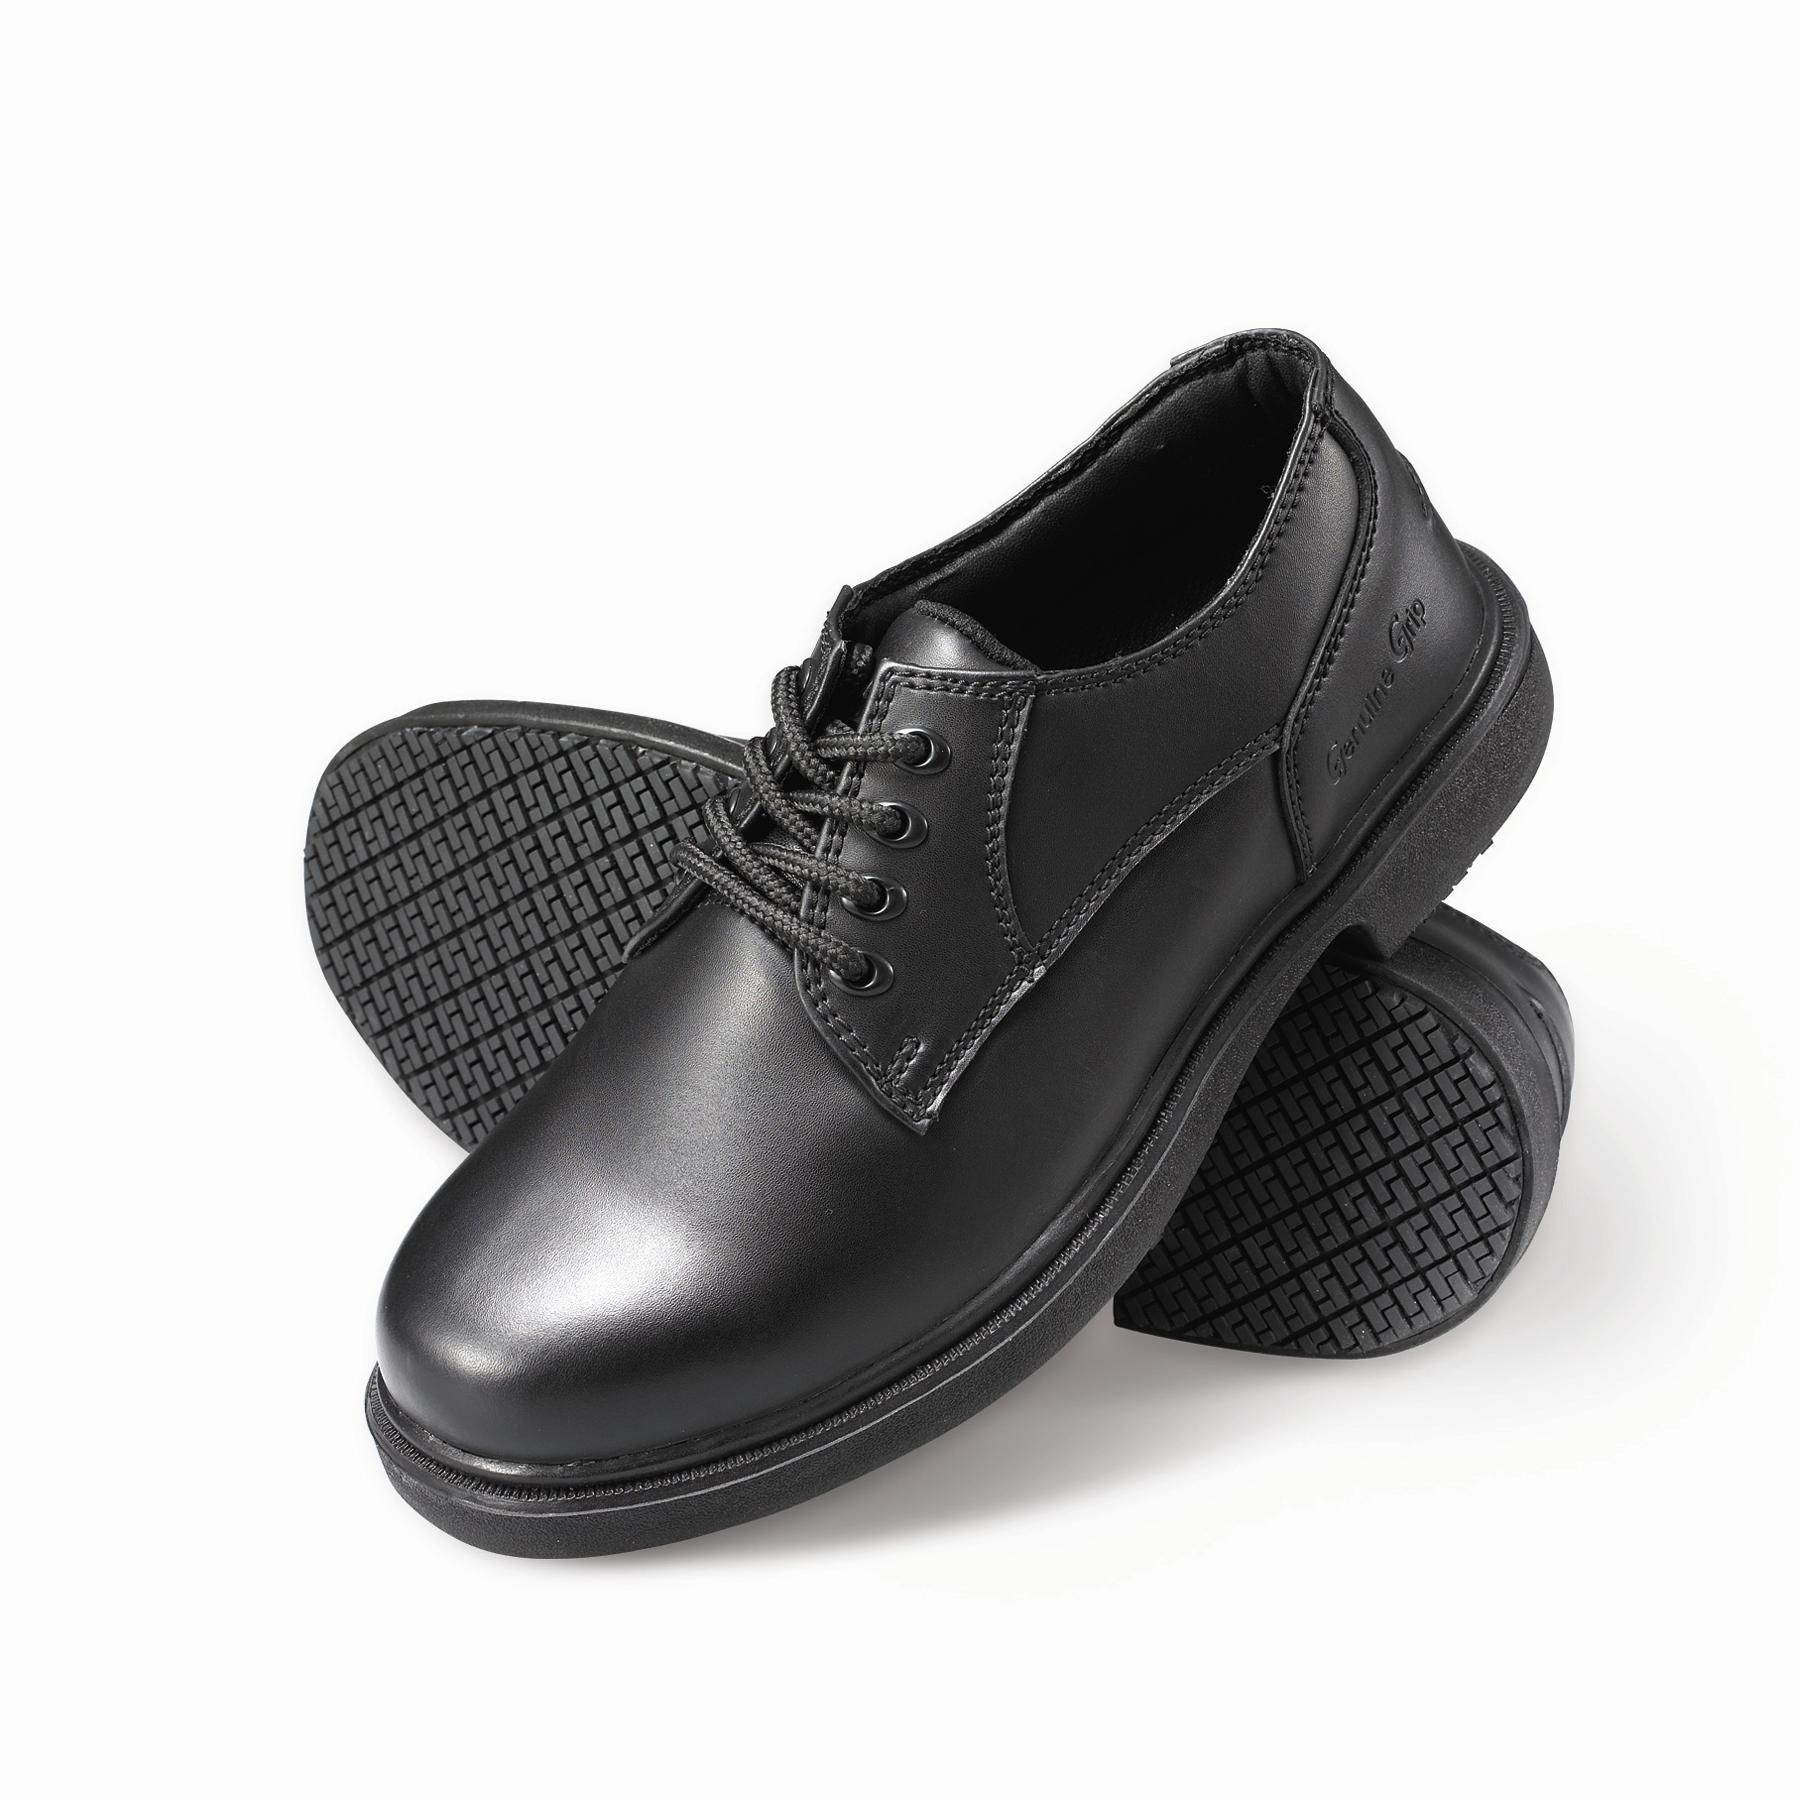 Top 99+ Pictures Pictures Of Slip Resistant Shoes Latest